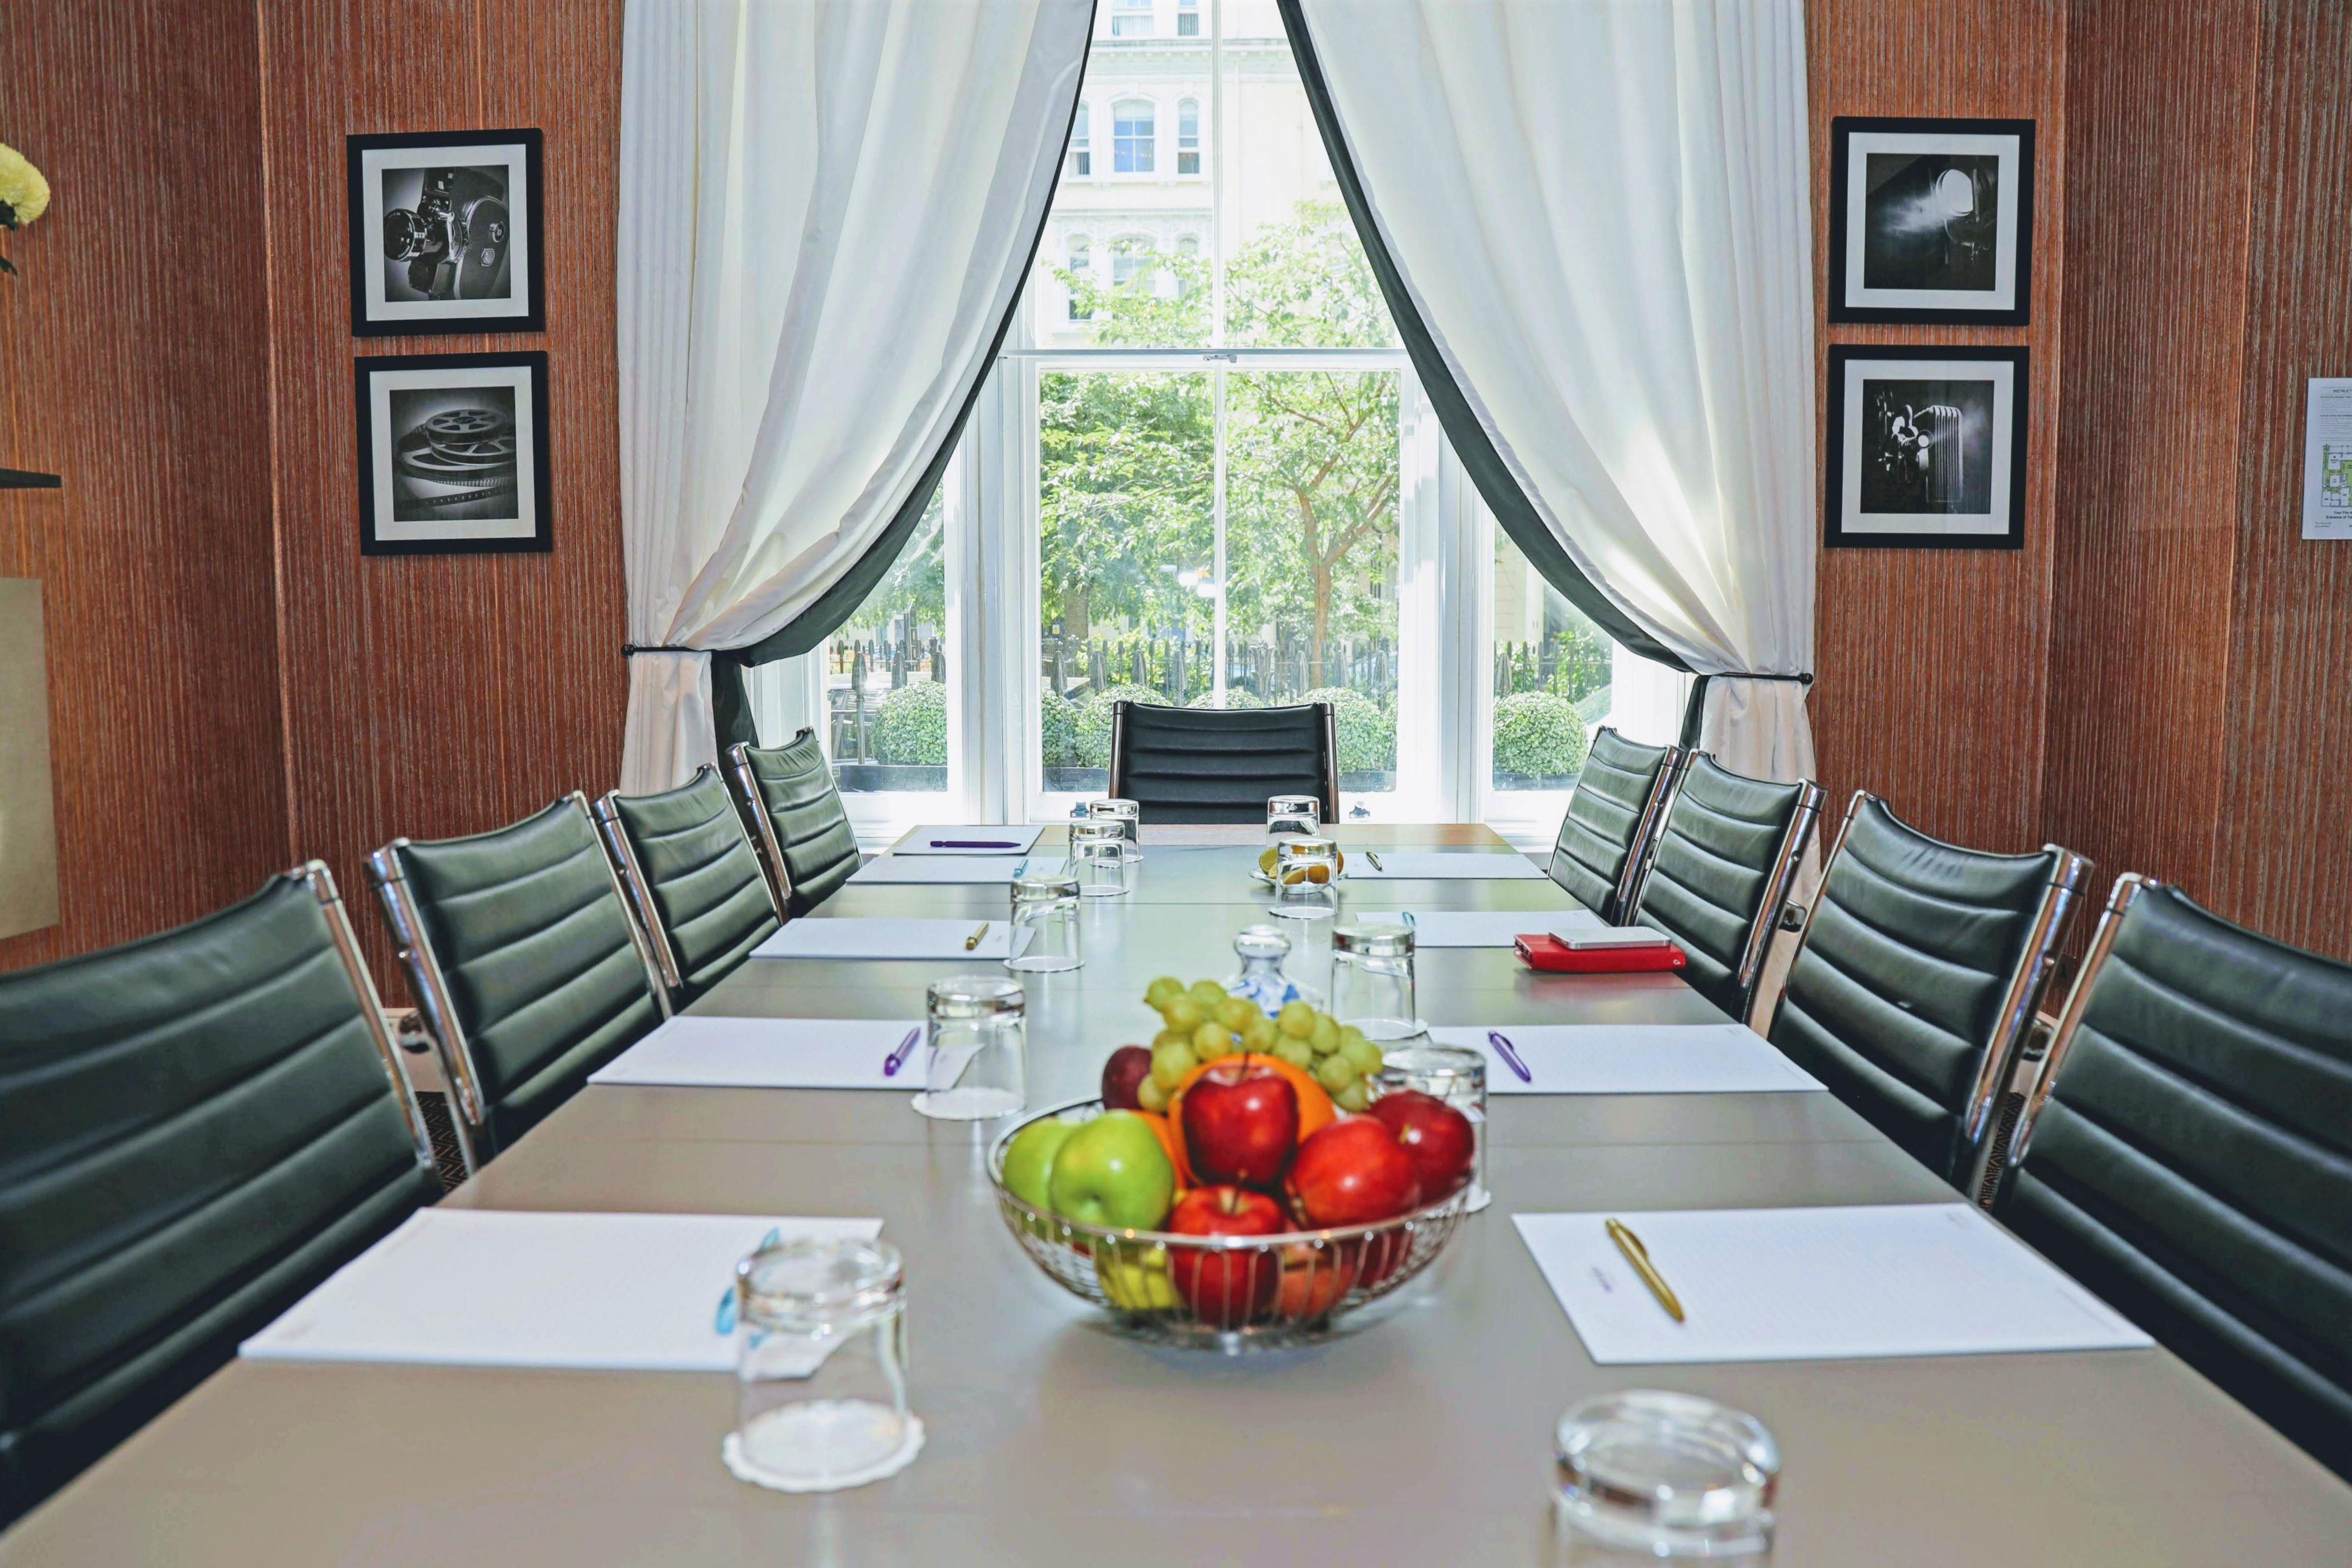 Fresh conference spaces with beautiful windows overlooking the leafy garden square. Available for up to 30 delegates and fully equipped with technology. Perfect for meetings, private dining, creativity and office use.